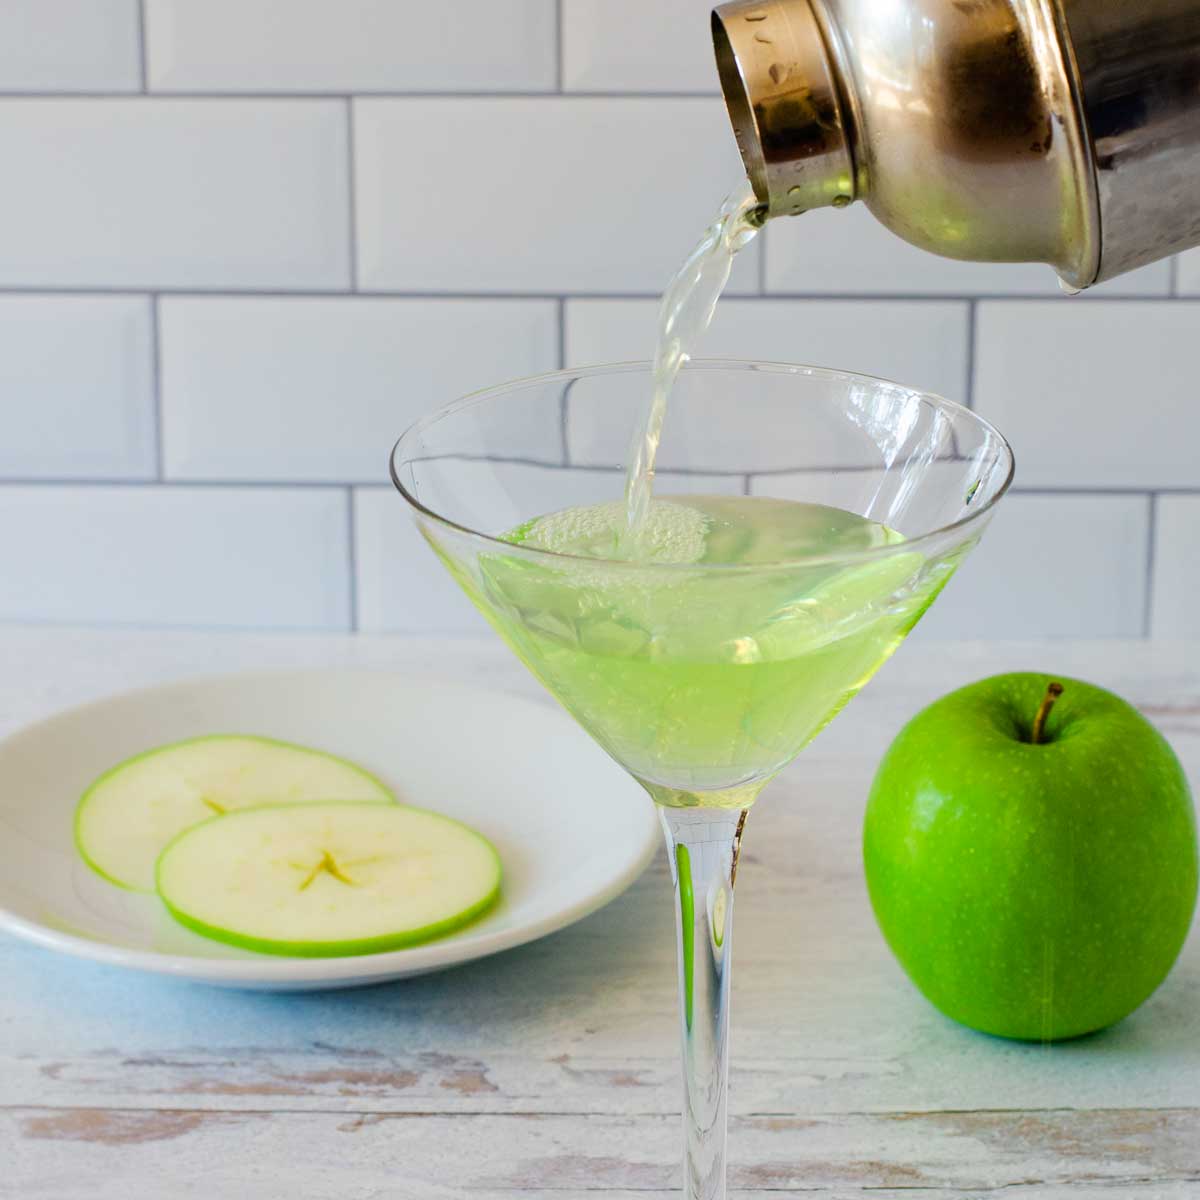 Appletini pouring into glass from cocktail shaker, green apple sliced